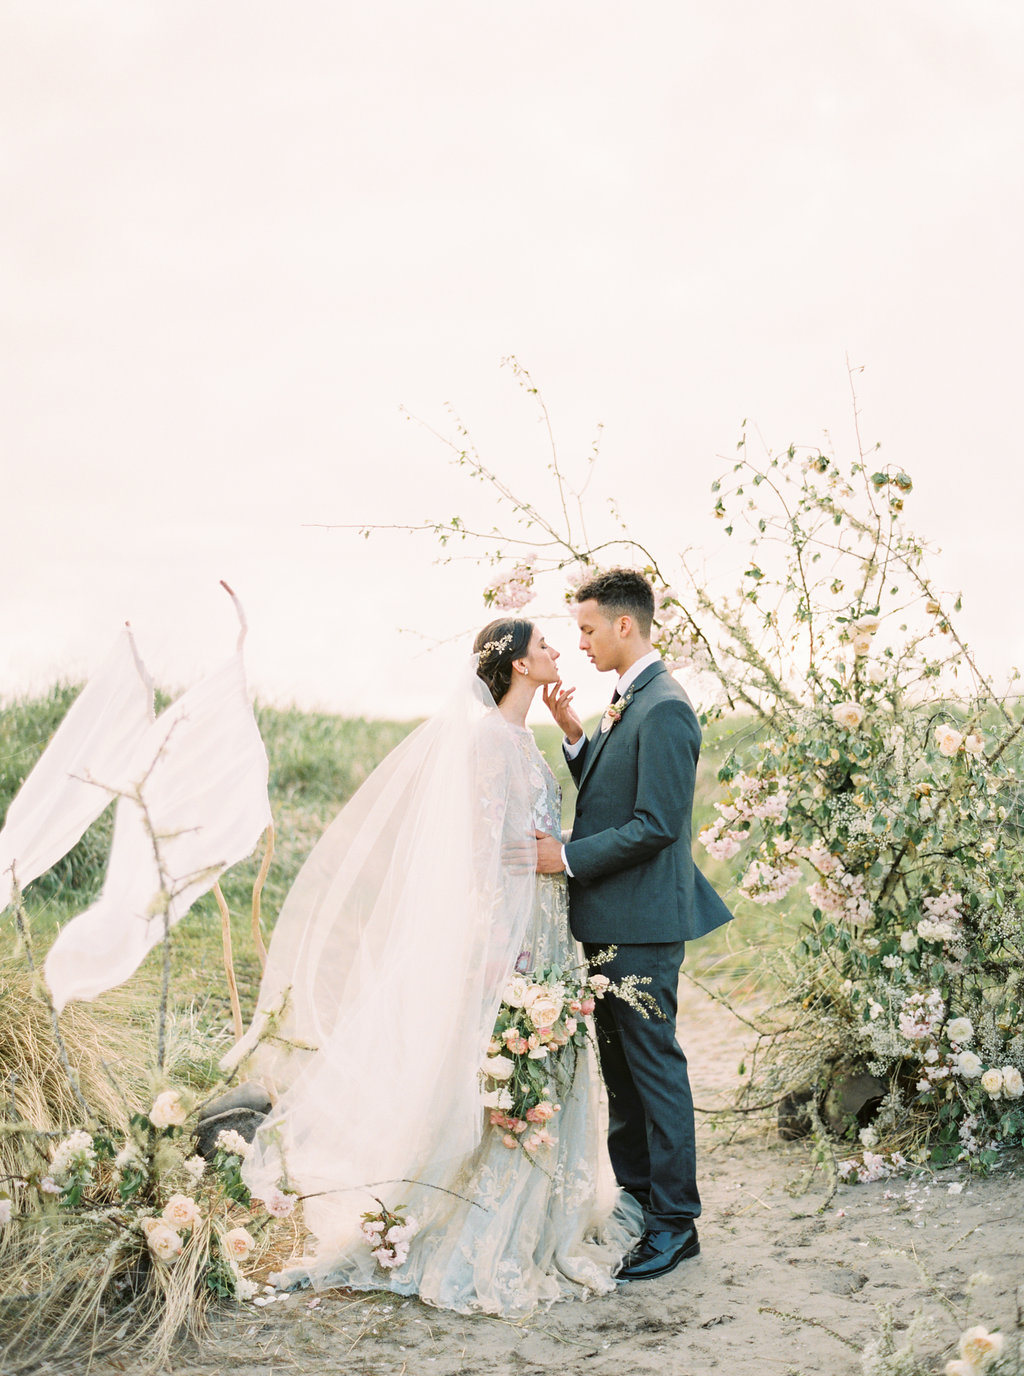 wedding inspiration - photo by Be Light Photography https://ruffledblog.com/coastal-oregon-inspiration-with-a-show-stopping-wedding-gown